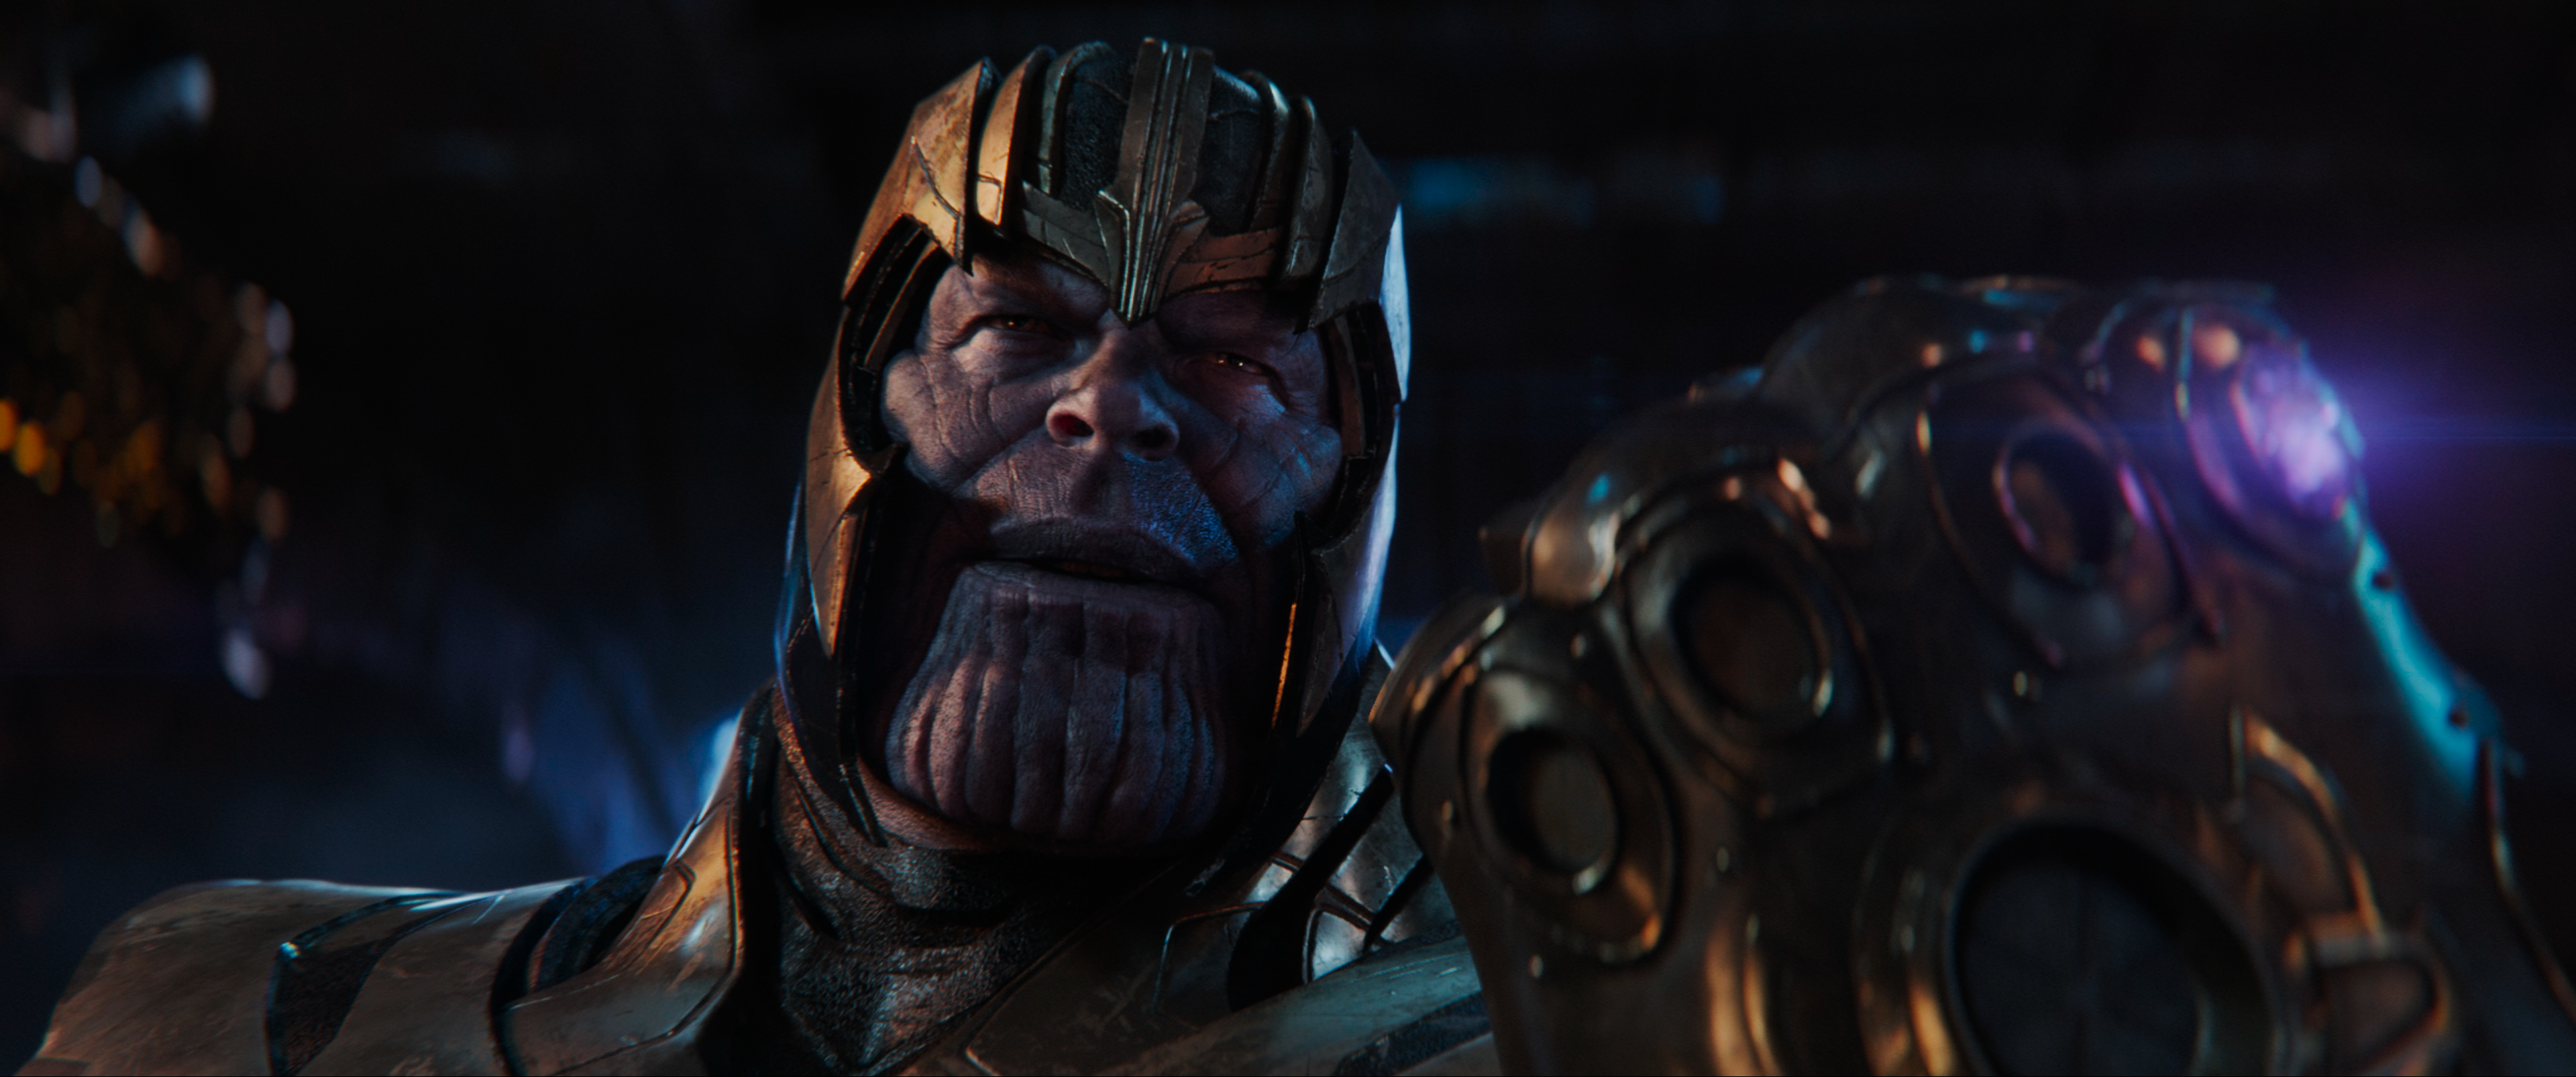 Marvel Finally Confirms The Collector's Fate After Avengers: Infinity War